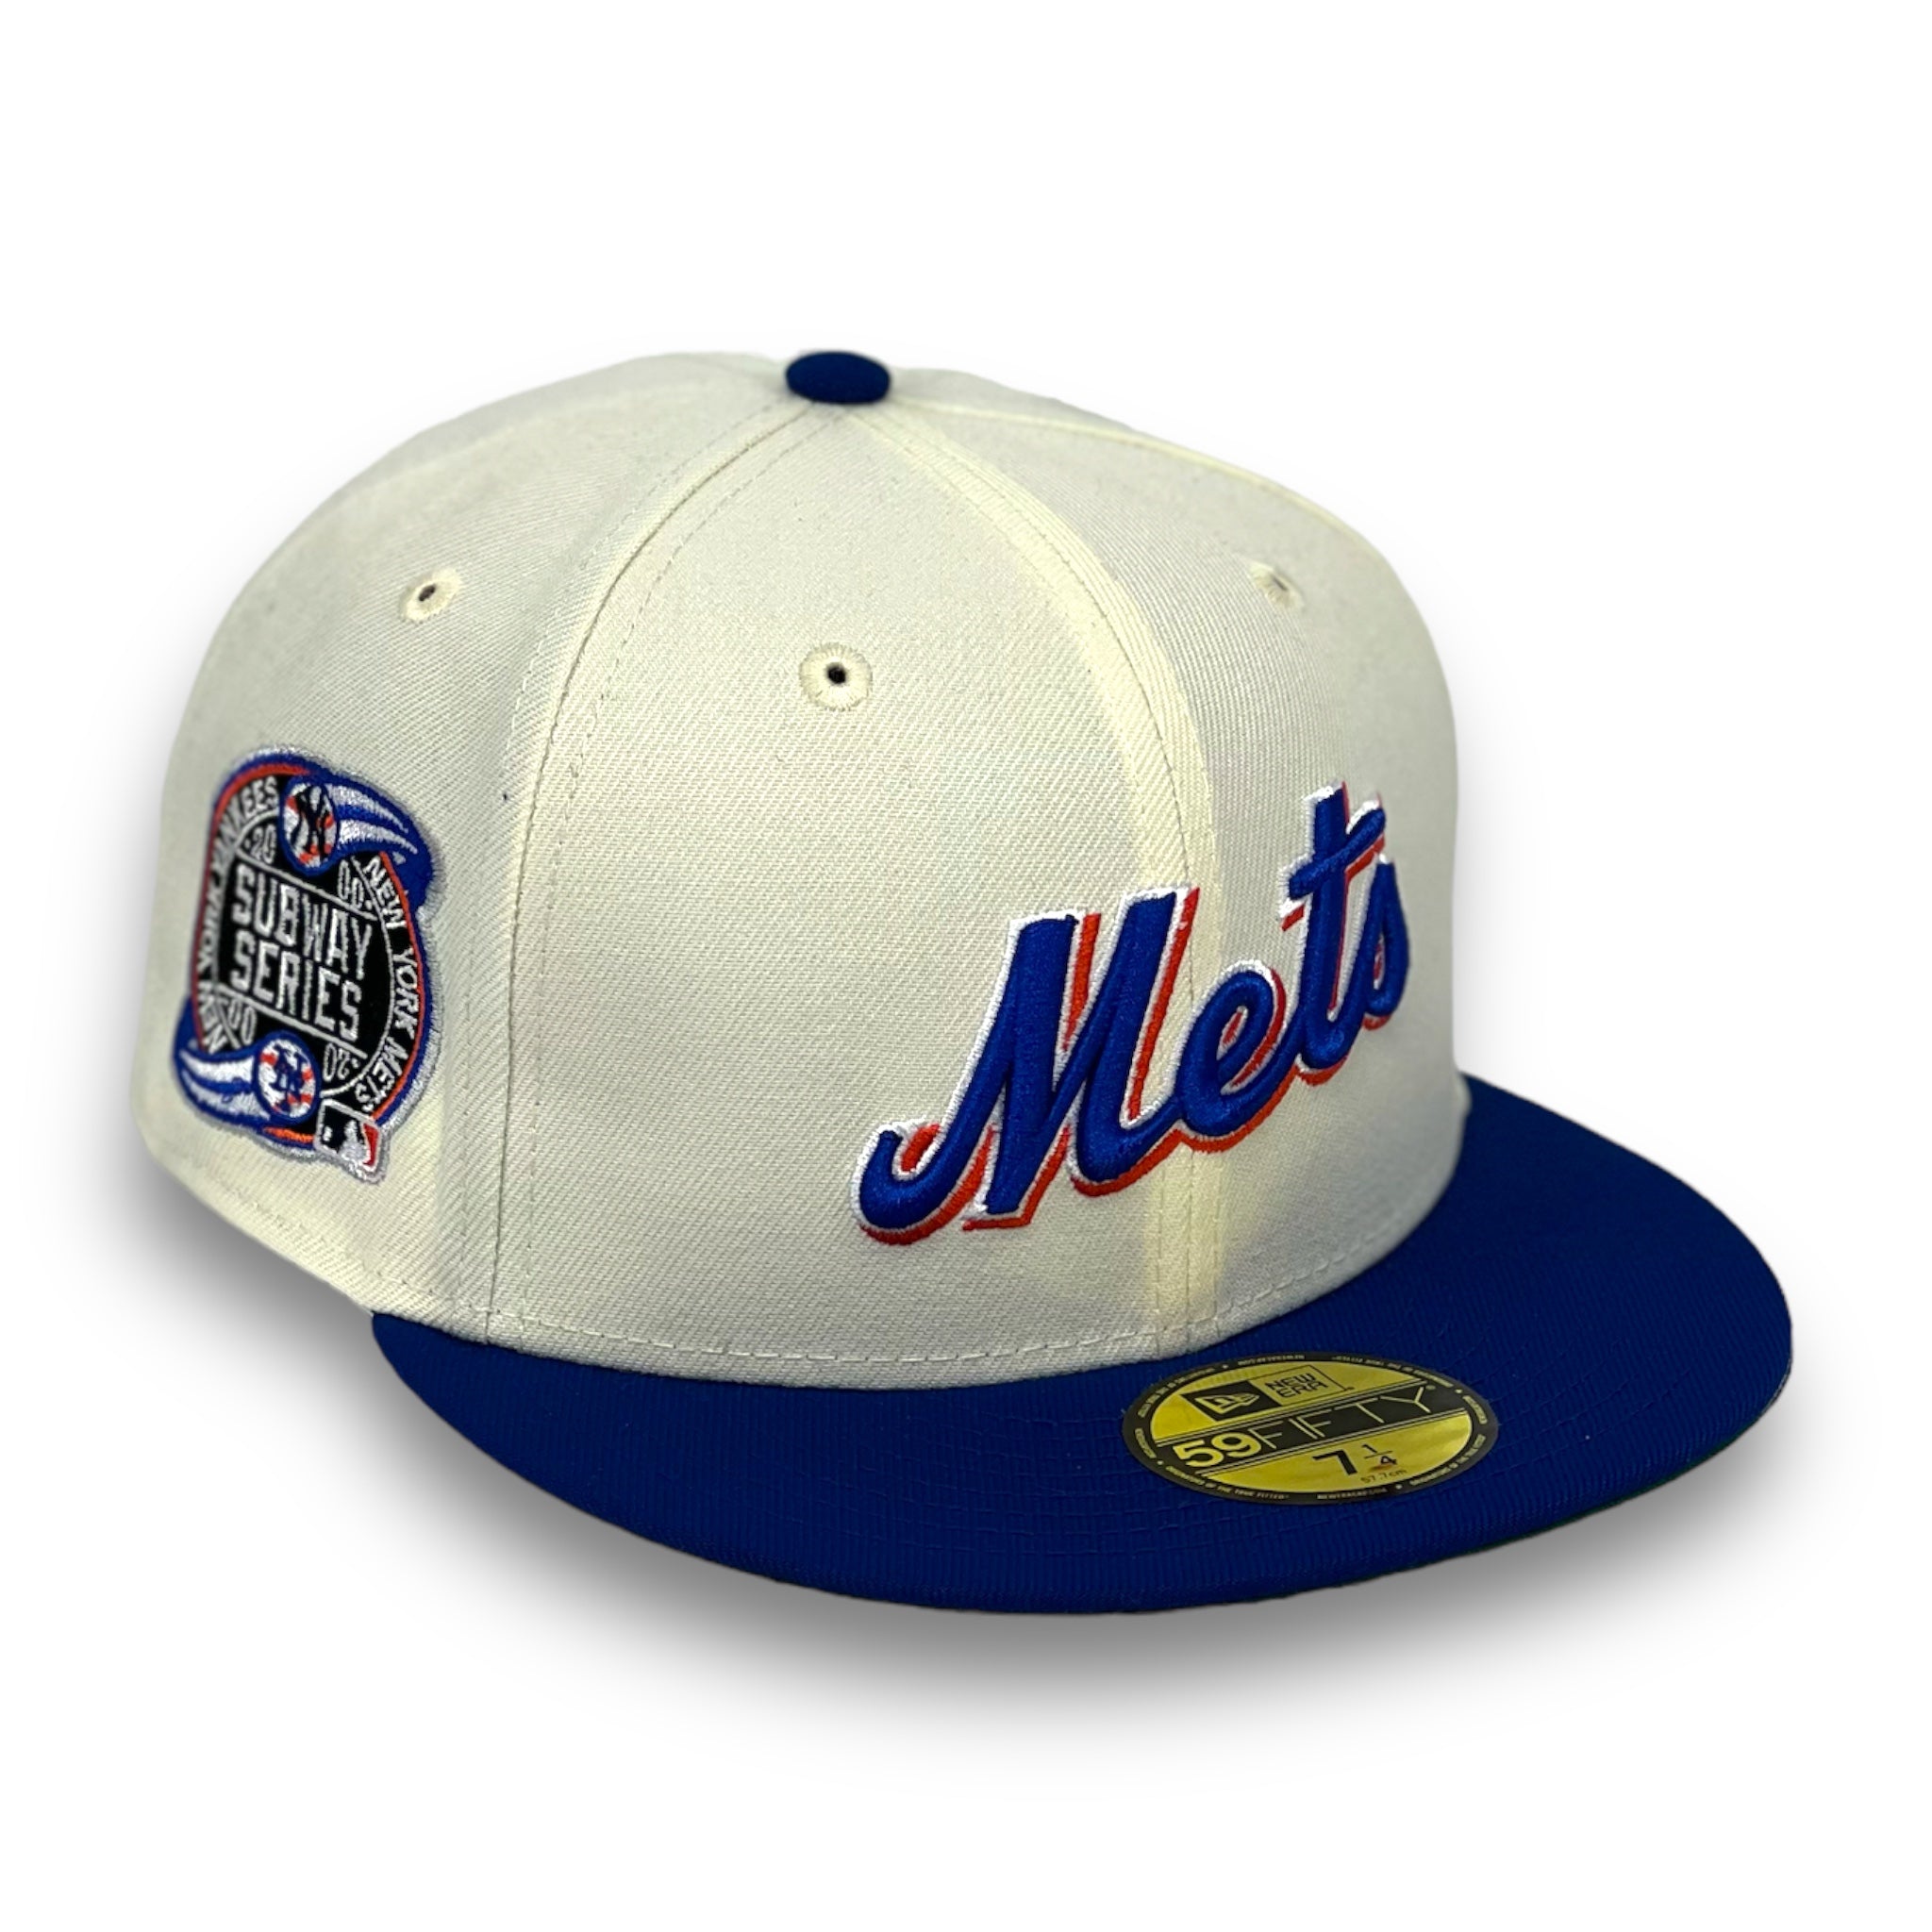 NEW YORK METS (OFF-WHITE)  (2000 SUBWAY SERIES) NEW ERA 59FIFTY FITTED (GREEN UNDER VISOR)